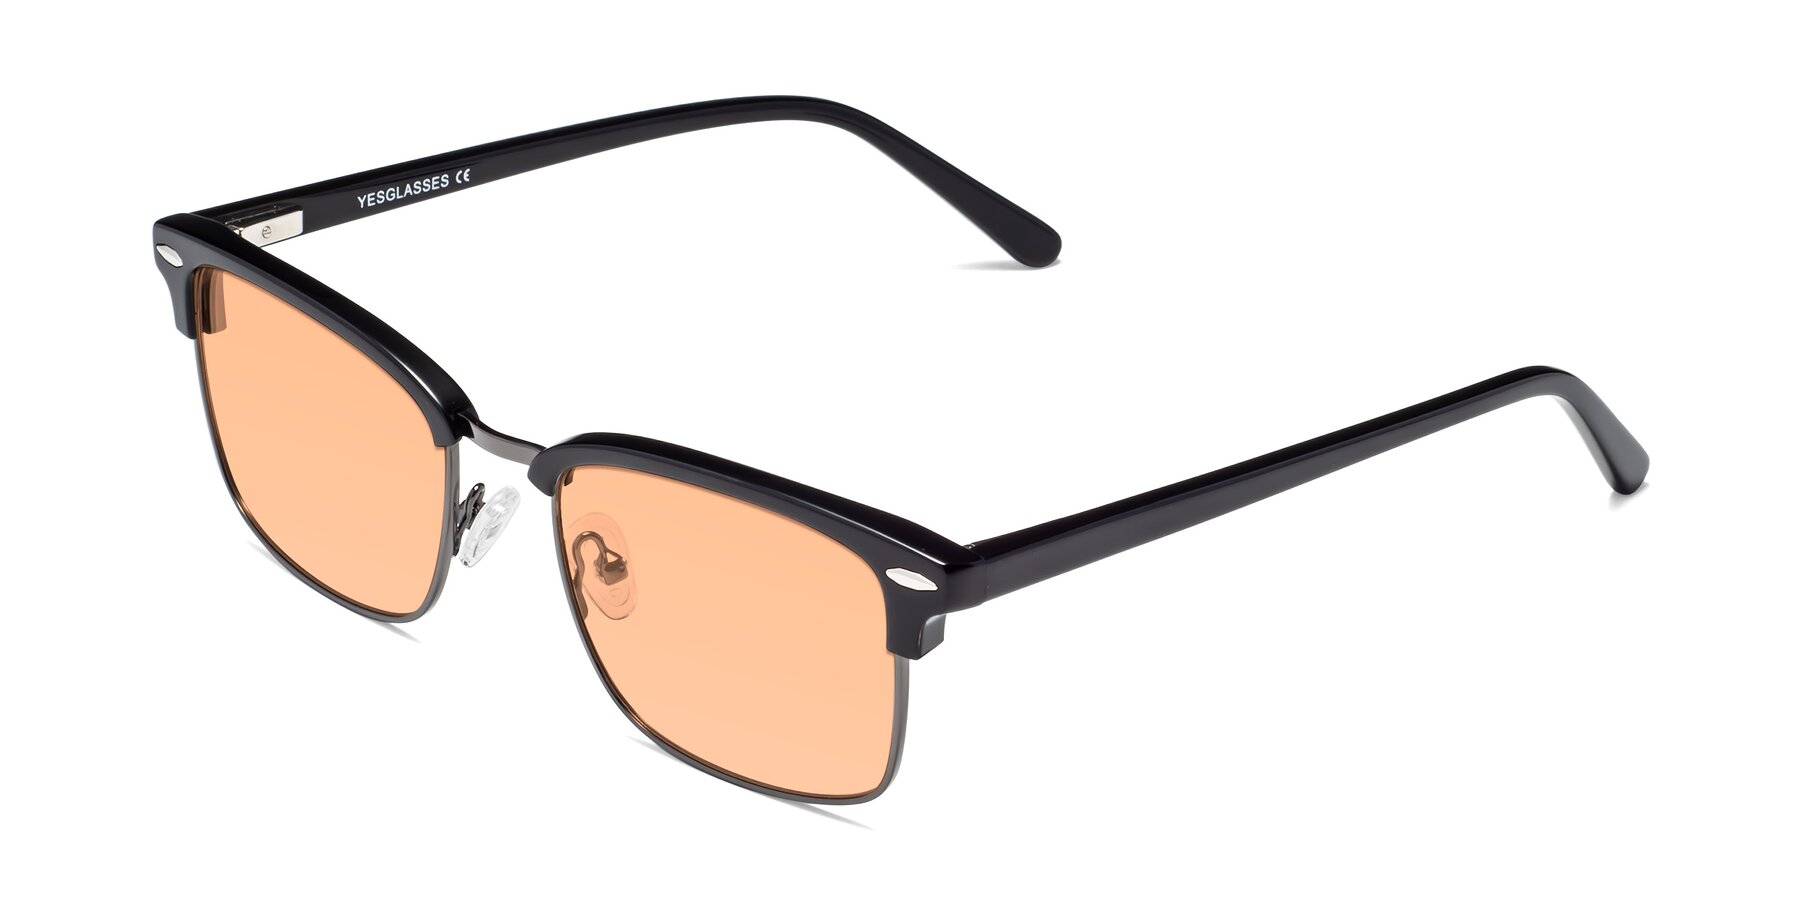 Angle of 17464 in Black-Gunmetal with Light Orange Tinted Lenses